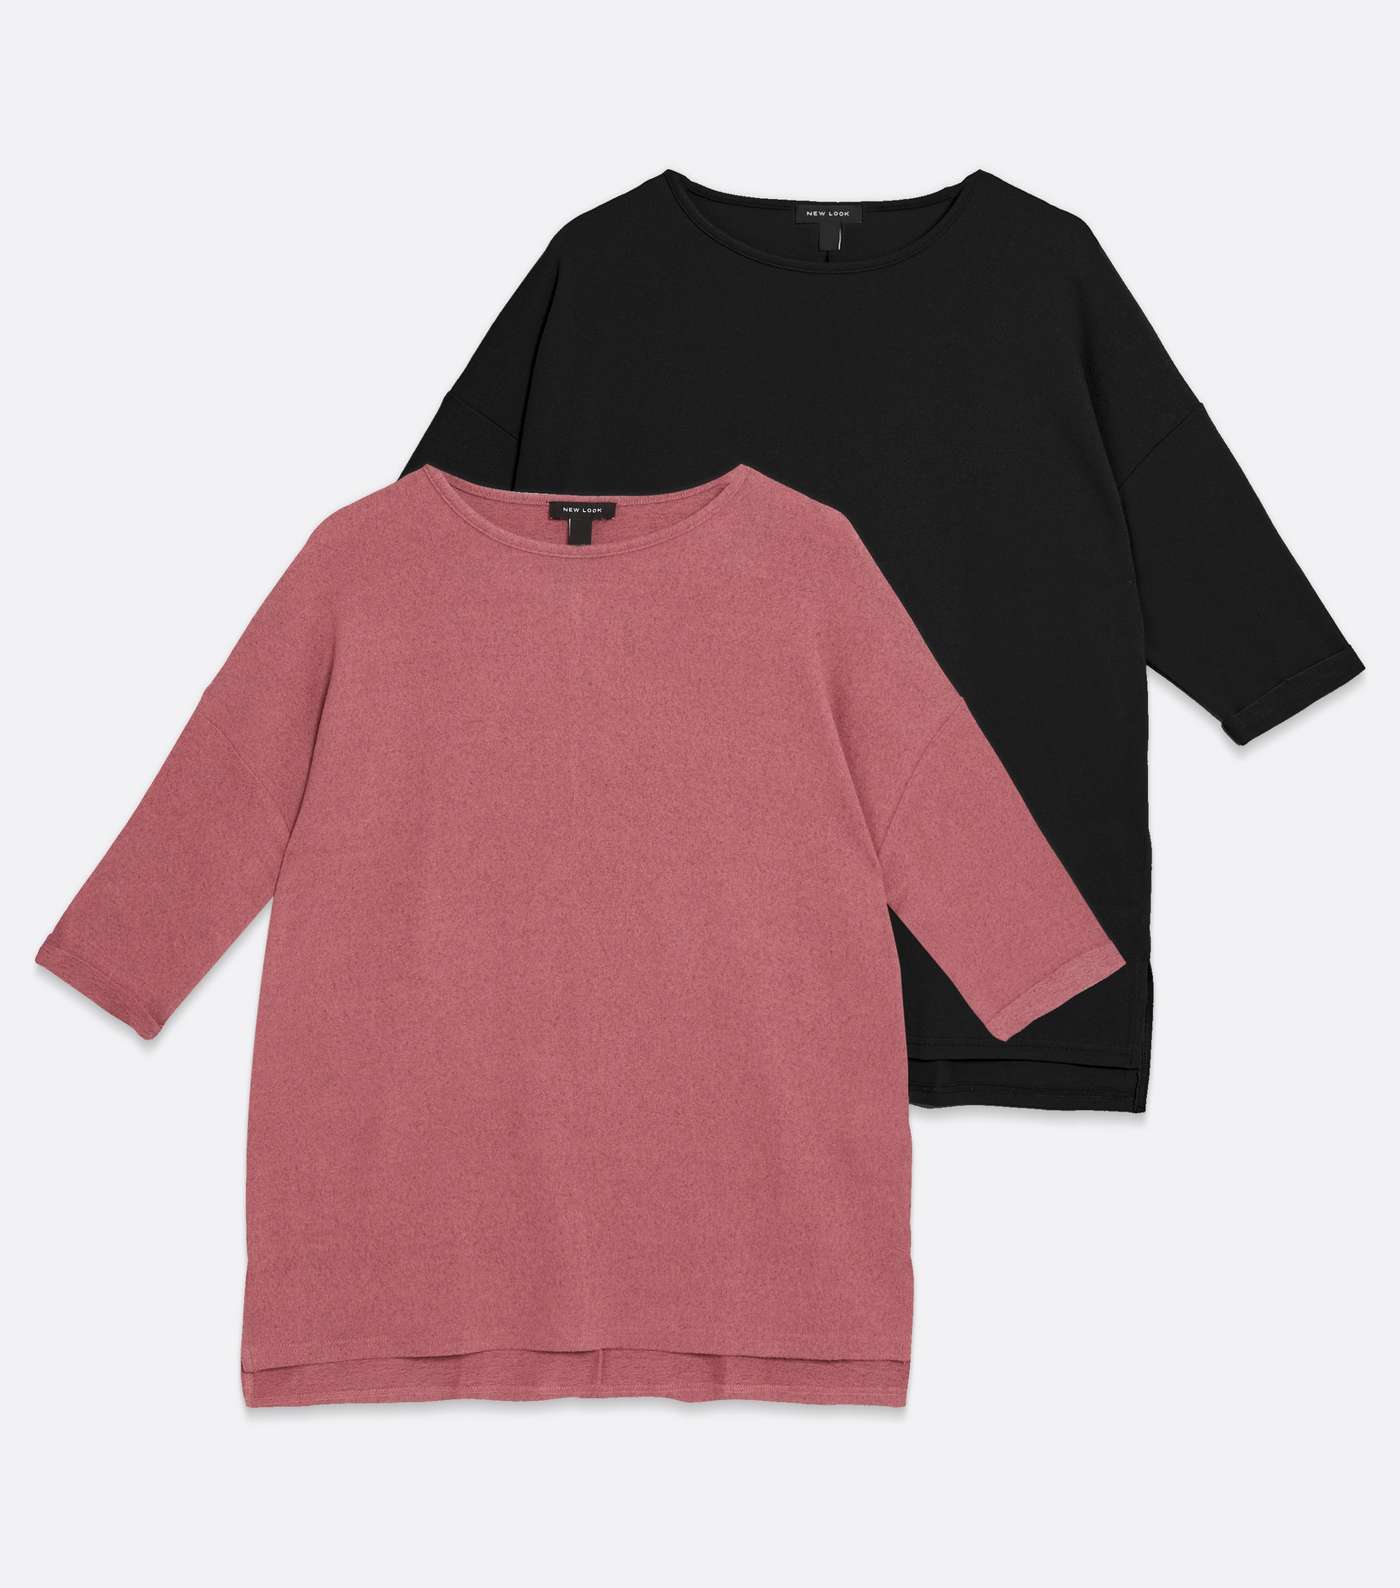 2 Pack Pink and Black Fine Knit 3/4 Sleeve Long Tops Image 5